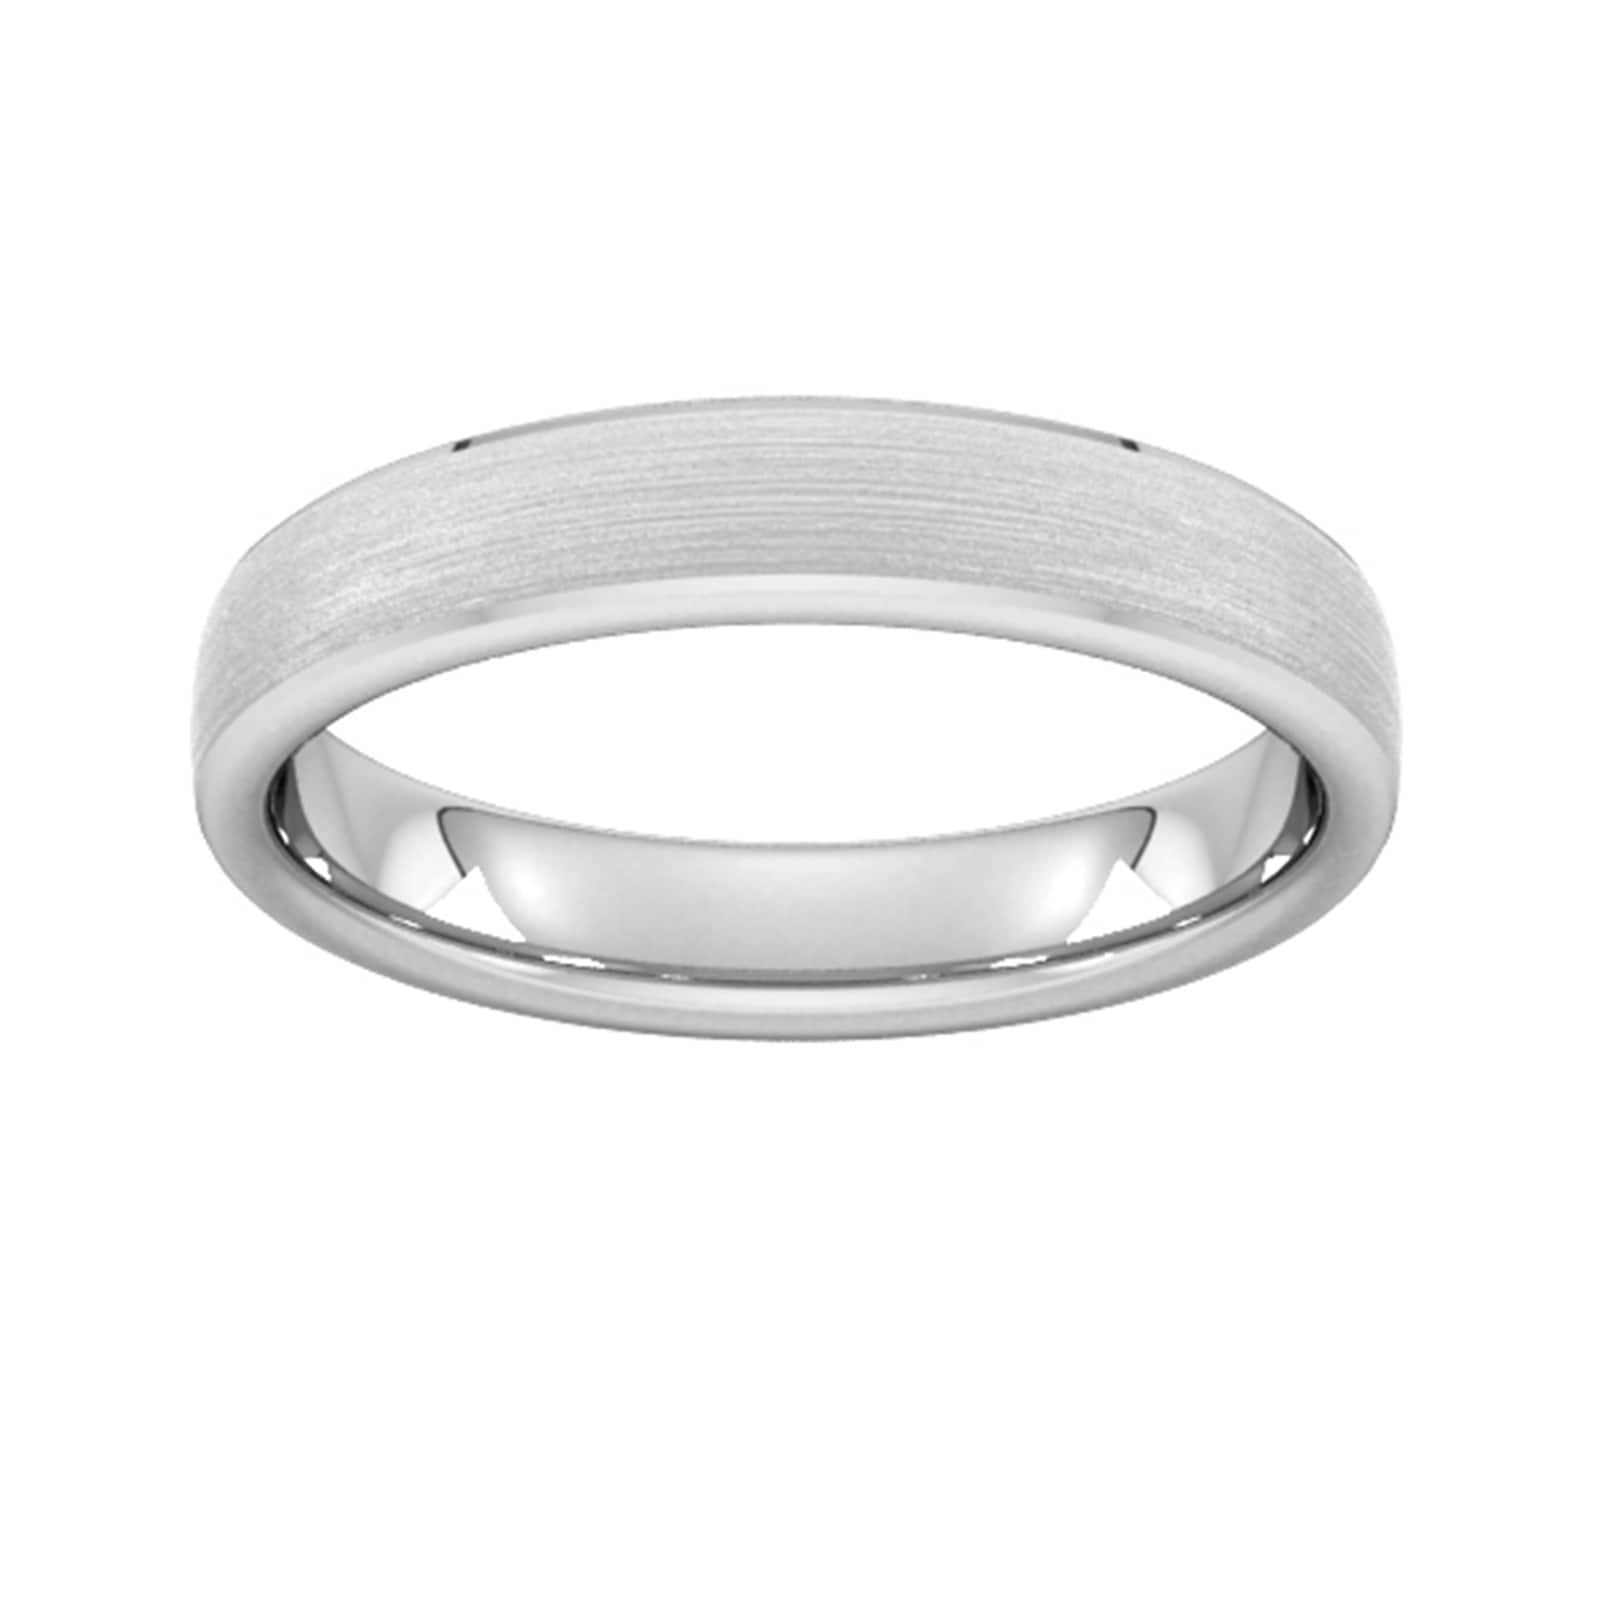 4mm Traditional Court Standard Polished Chamfered Edges With Matt Centre Wedding Ring In Platinum - Ring Size M